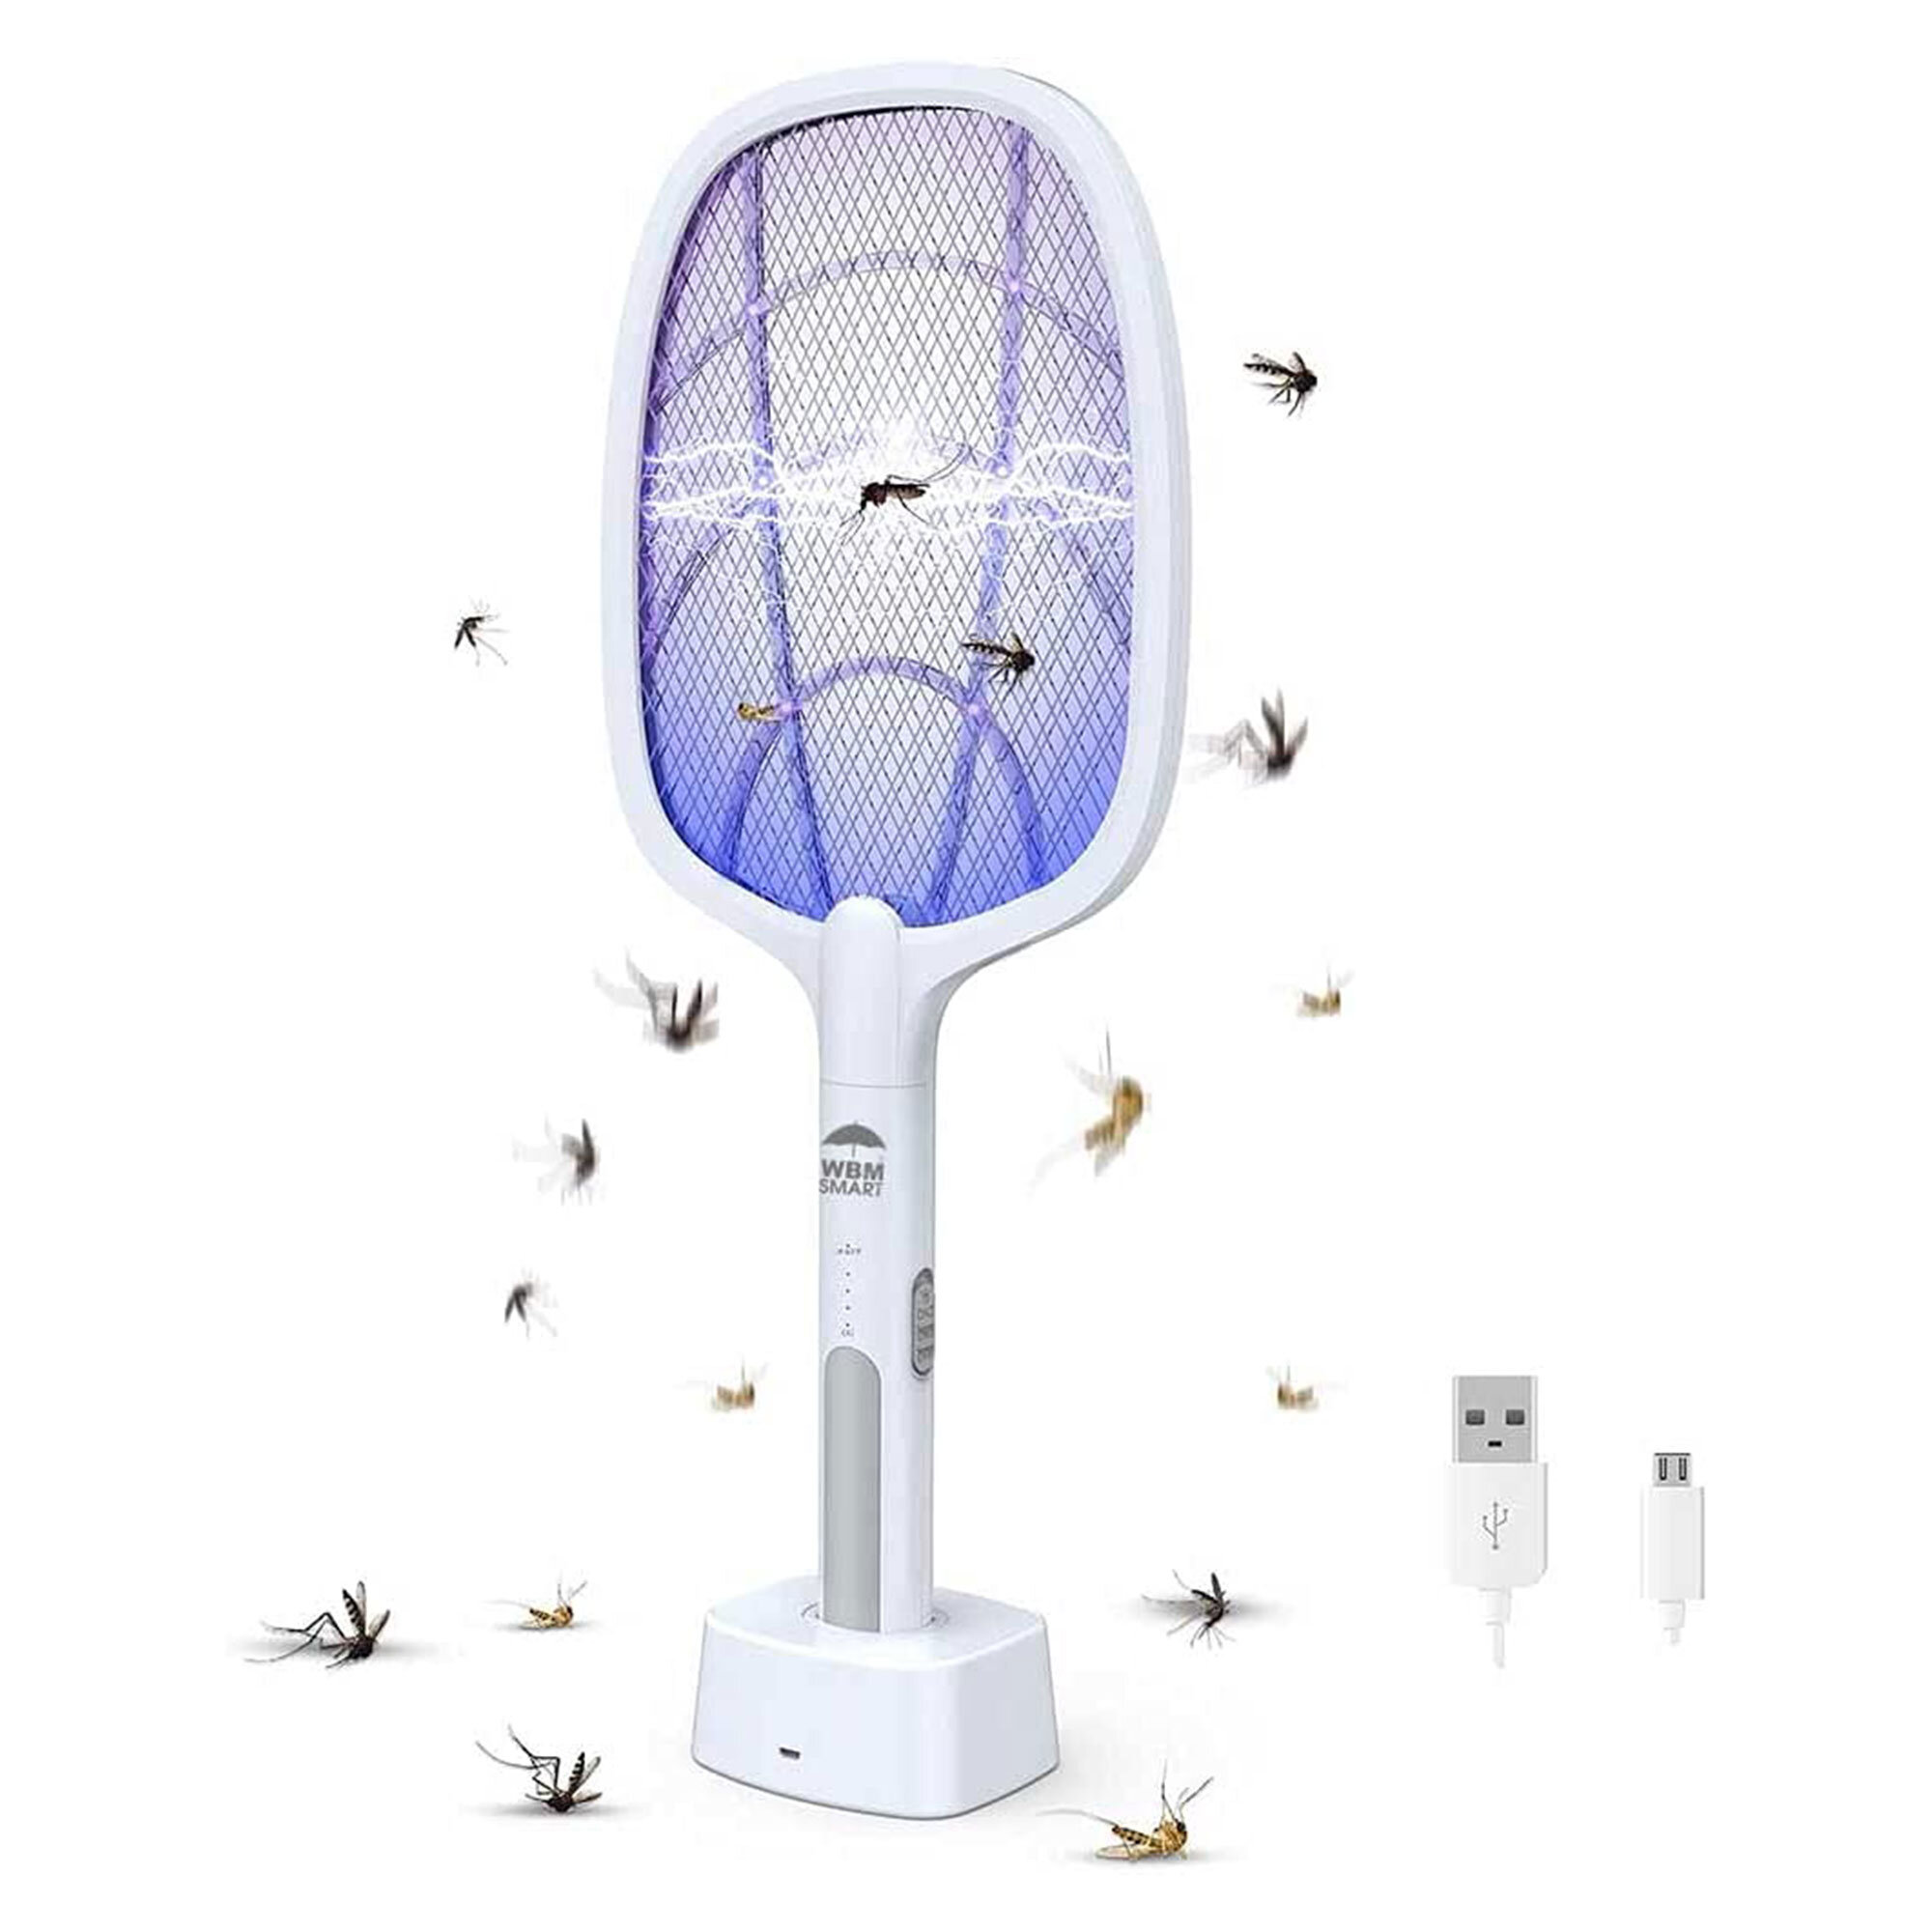 Usb Pest Control Zapper, Insect Trap Outdoor